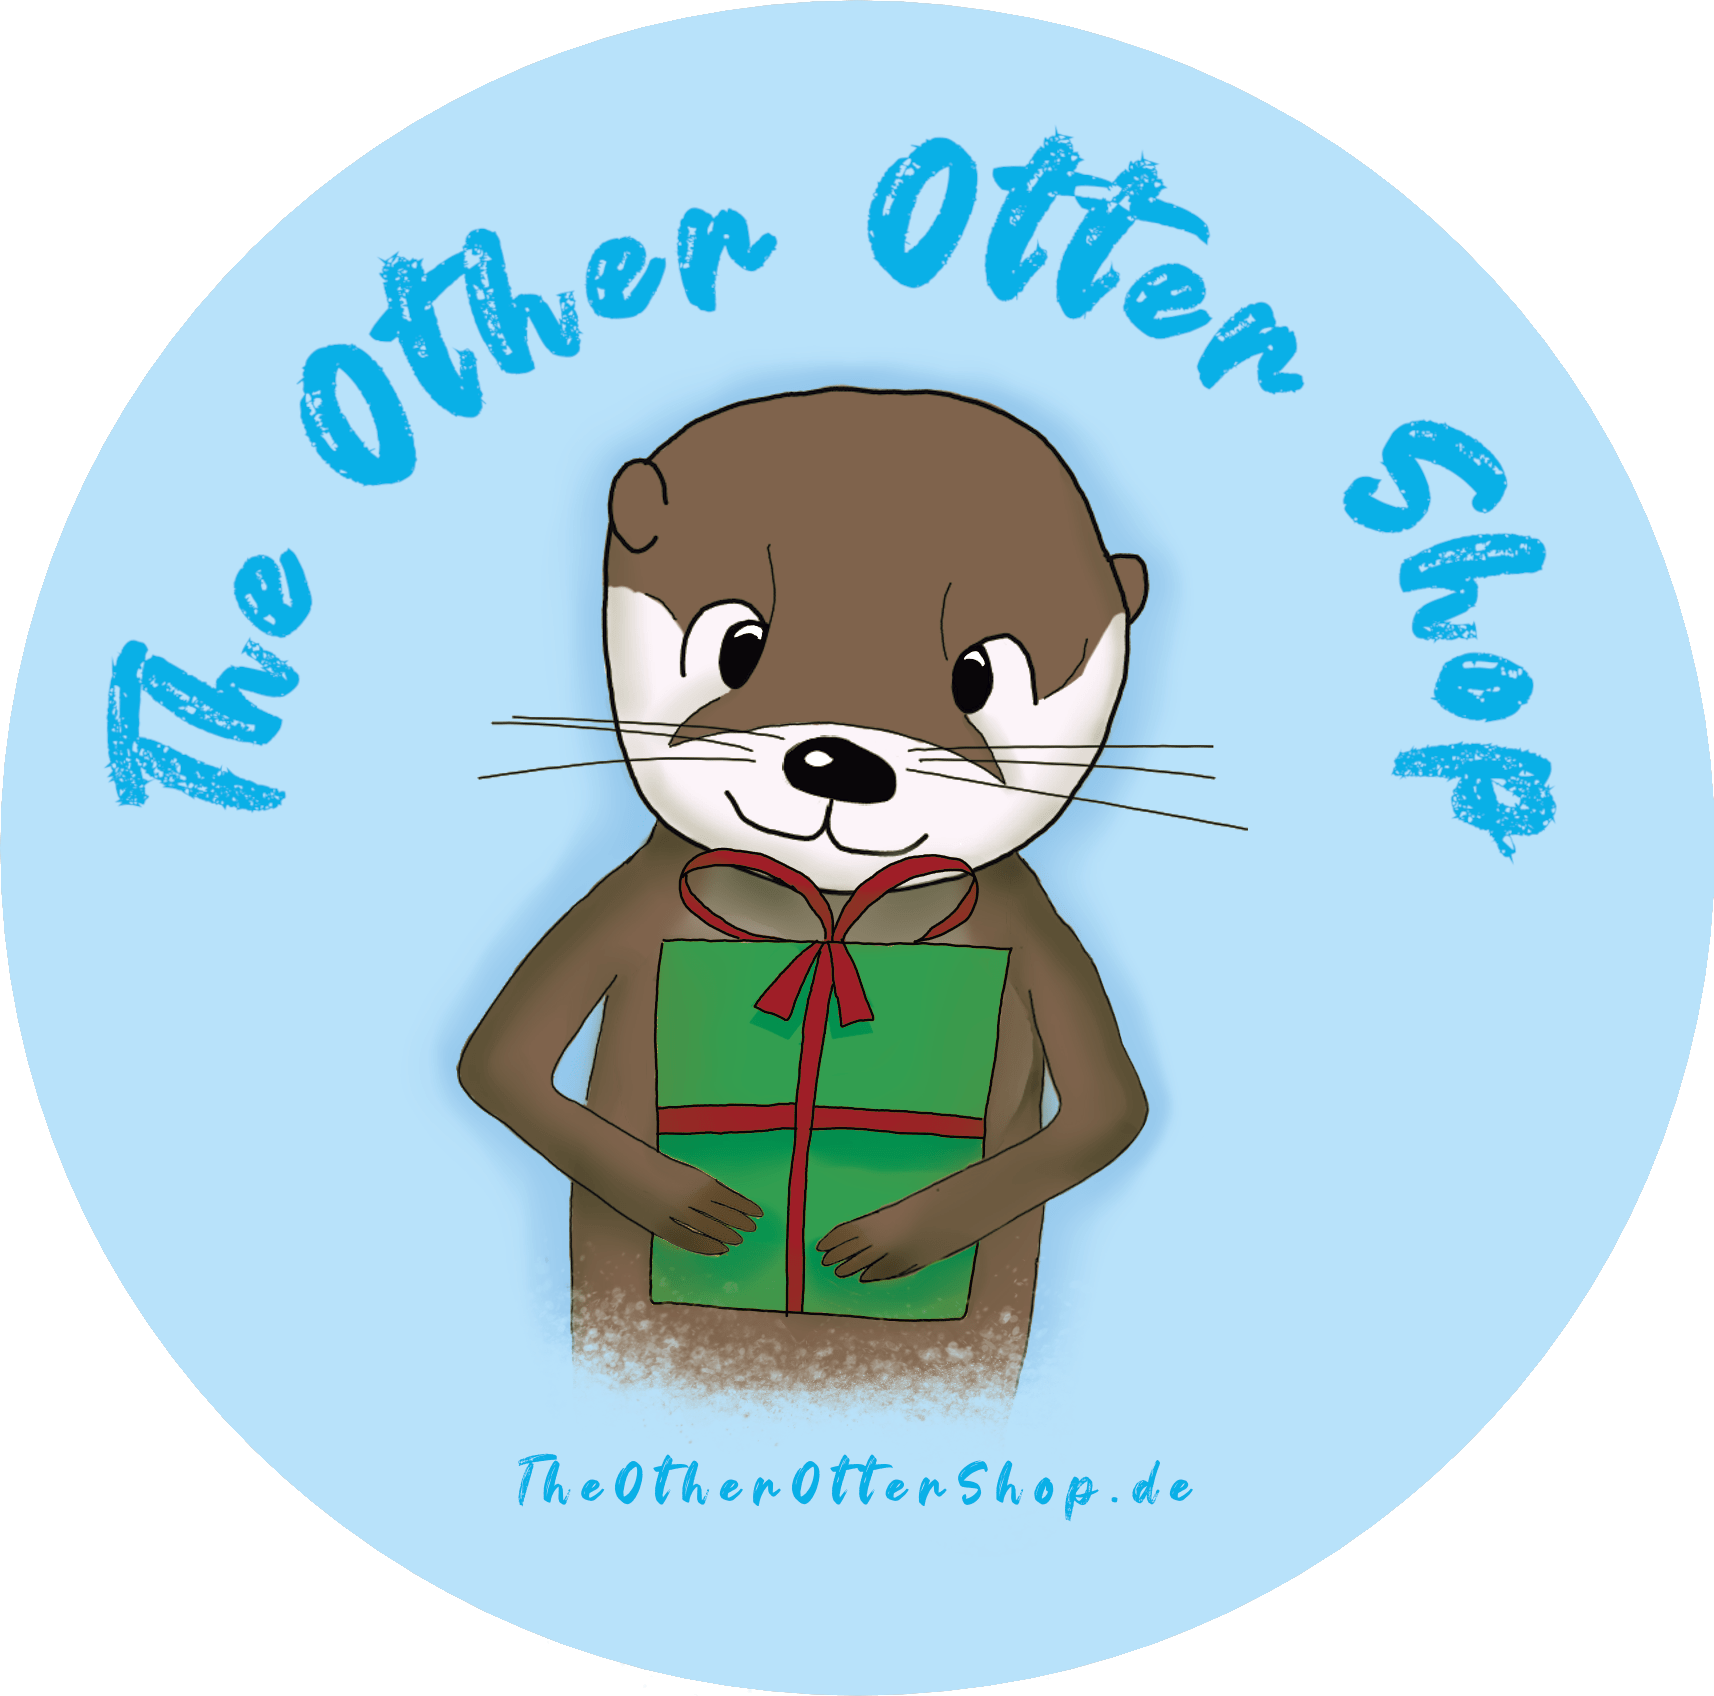 The Other Otter Shop